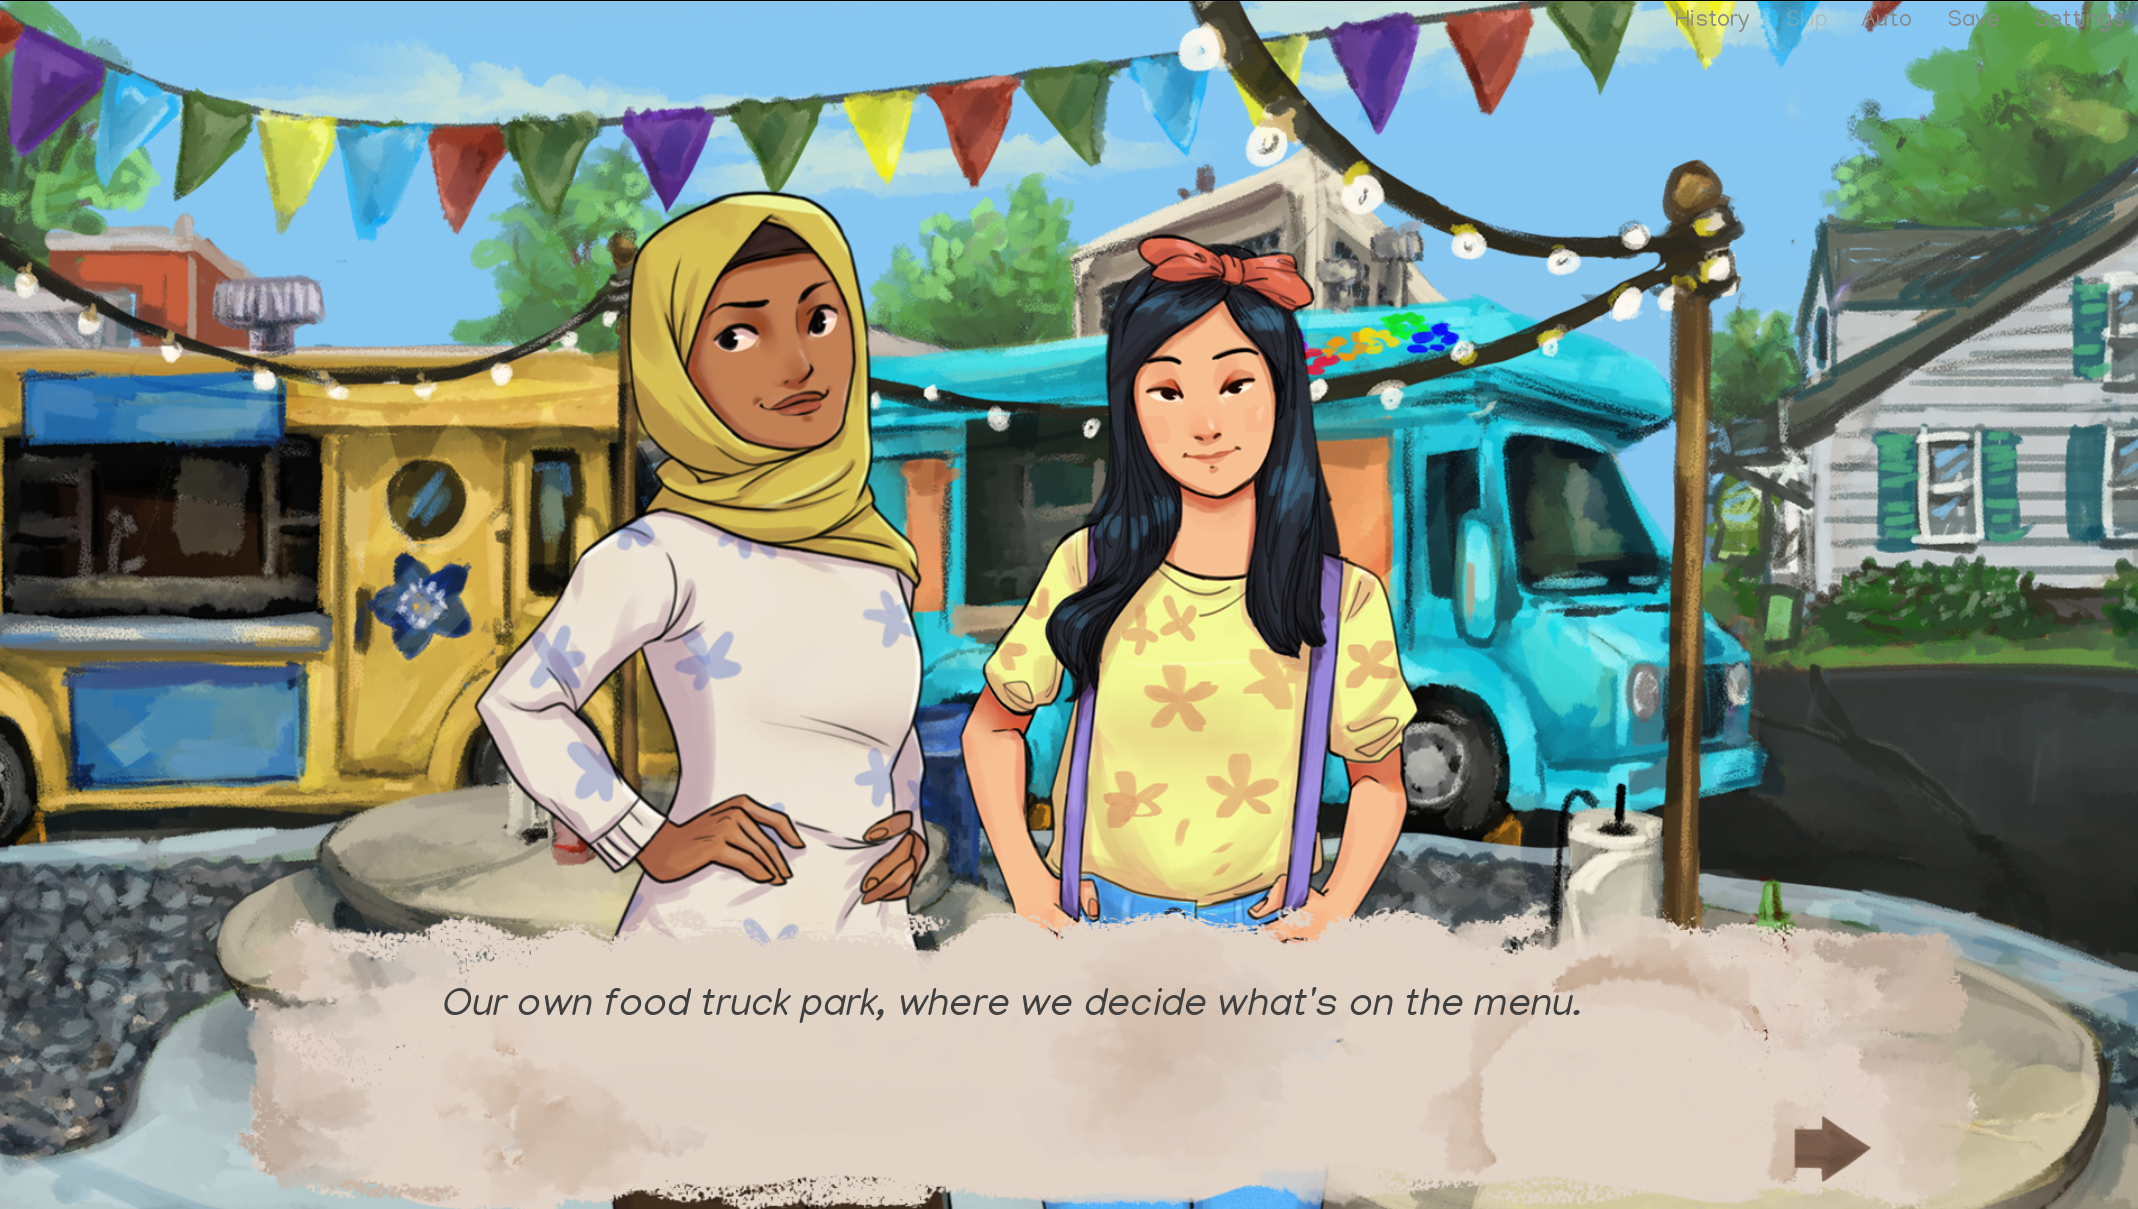 Amira on the left and Jessica on the right. The text says our own food truck park where we decide what's on the menu